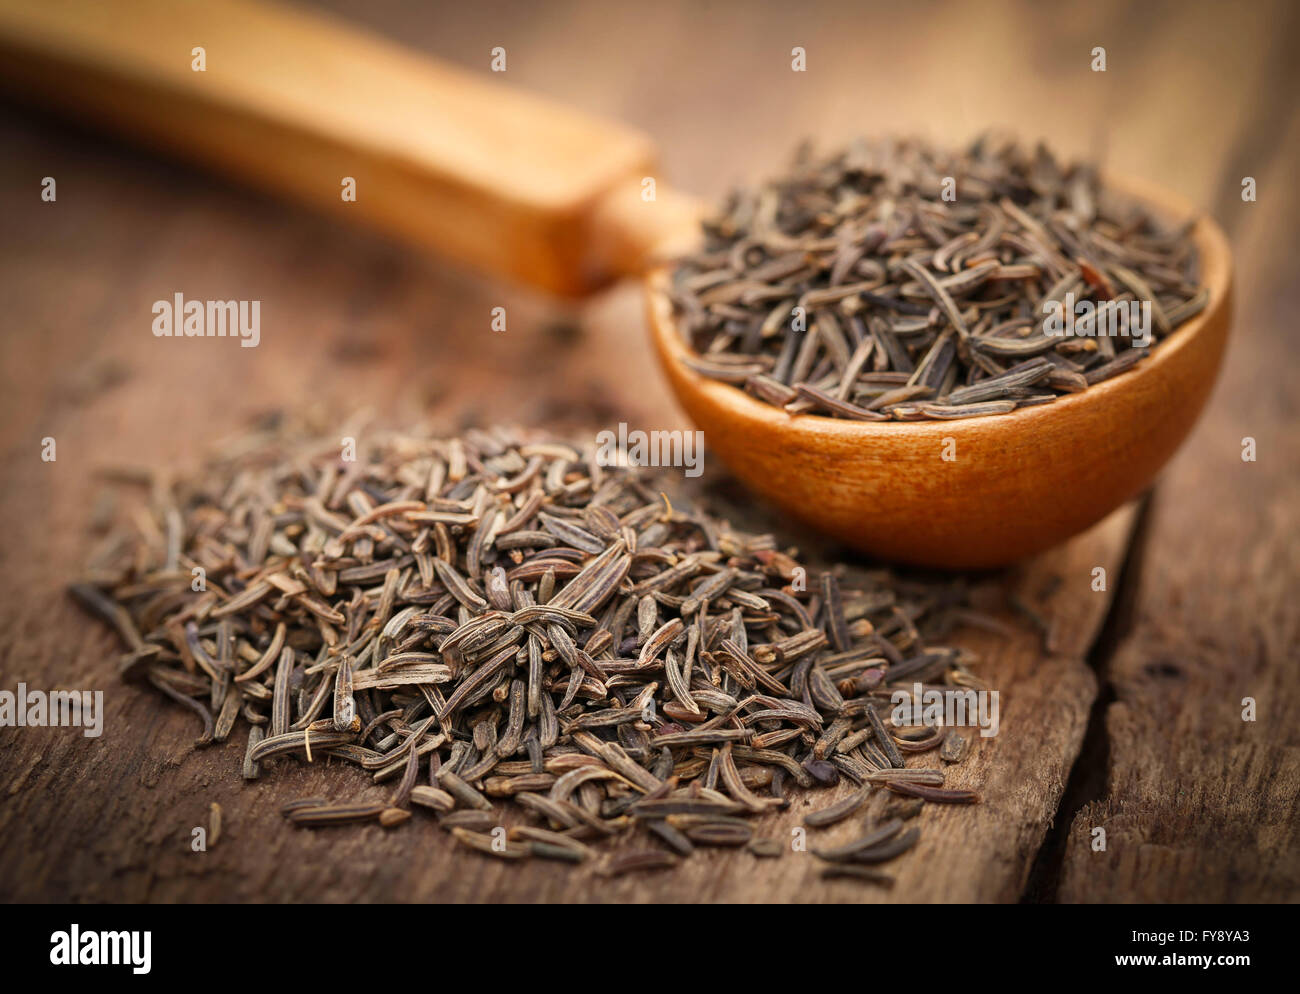 Caraway seeds in a spoon on wooden surface Stock Photo